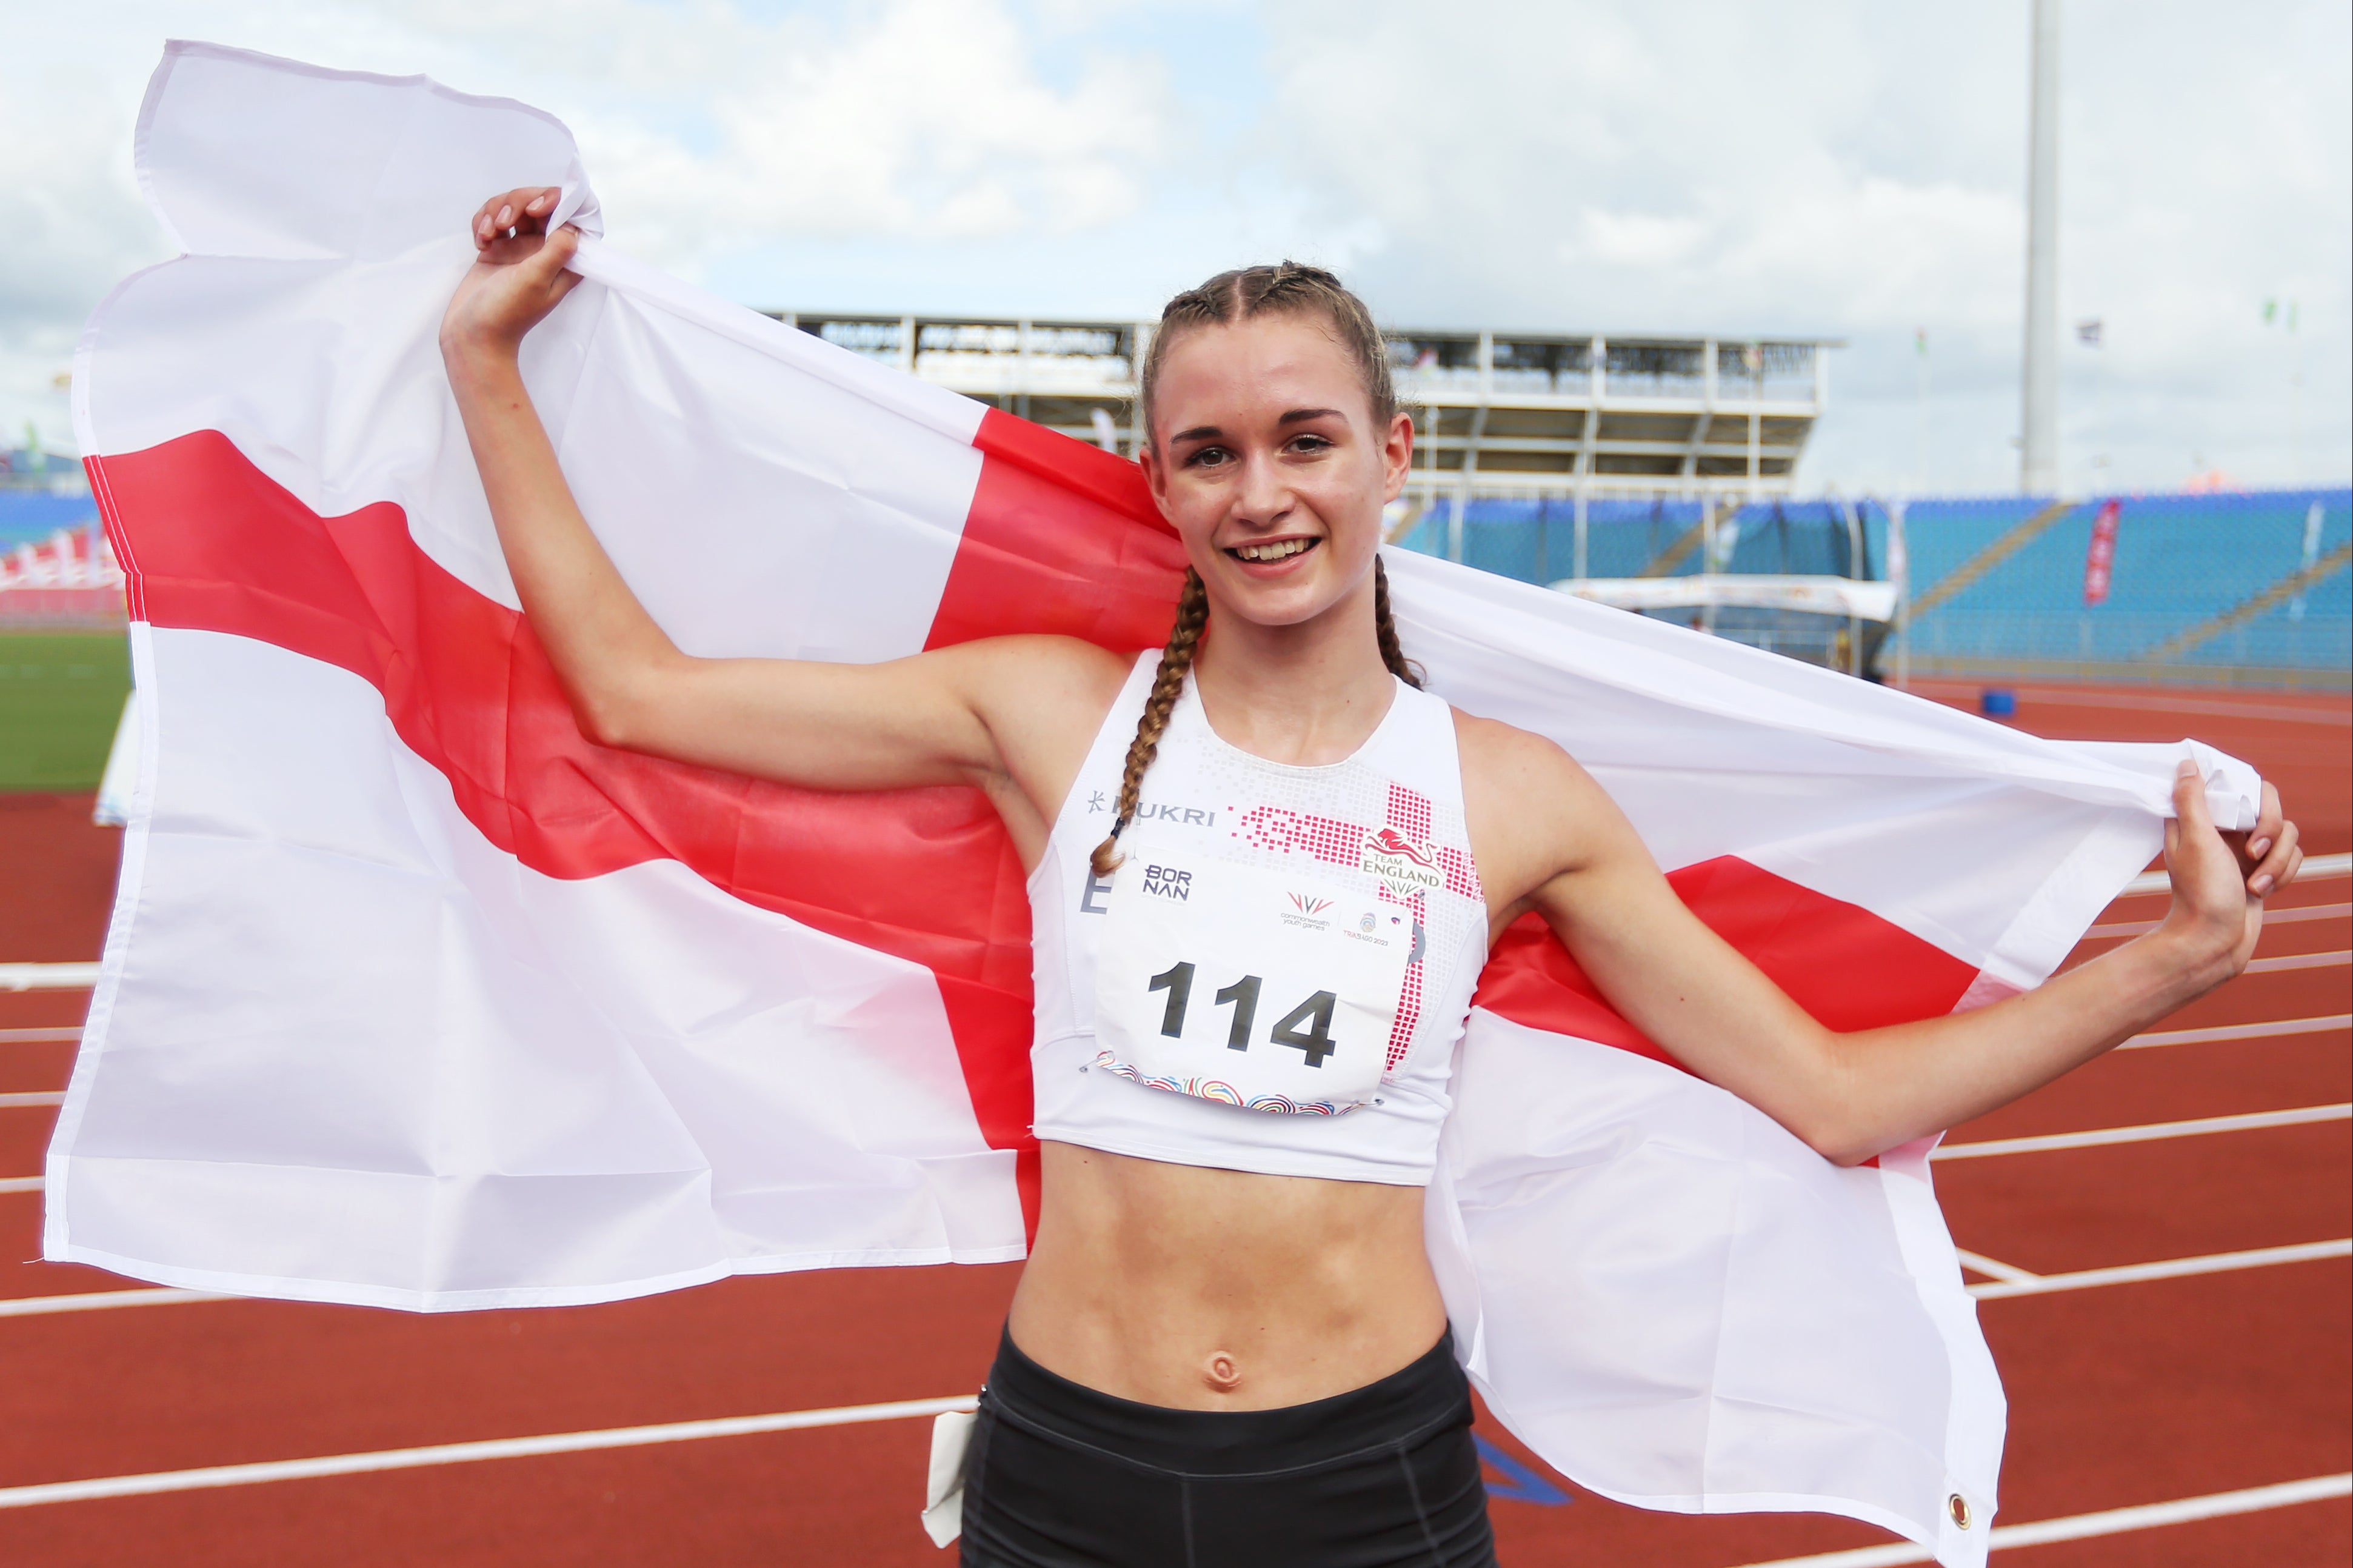 phoebe gill, keely hodgkinson, paris 2024, laura muir, british athletics, team gb, uk athletics, who is phoebe gill? the teenage runner who could make paris 2024